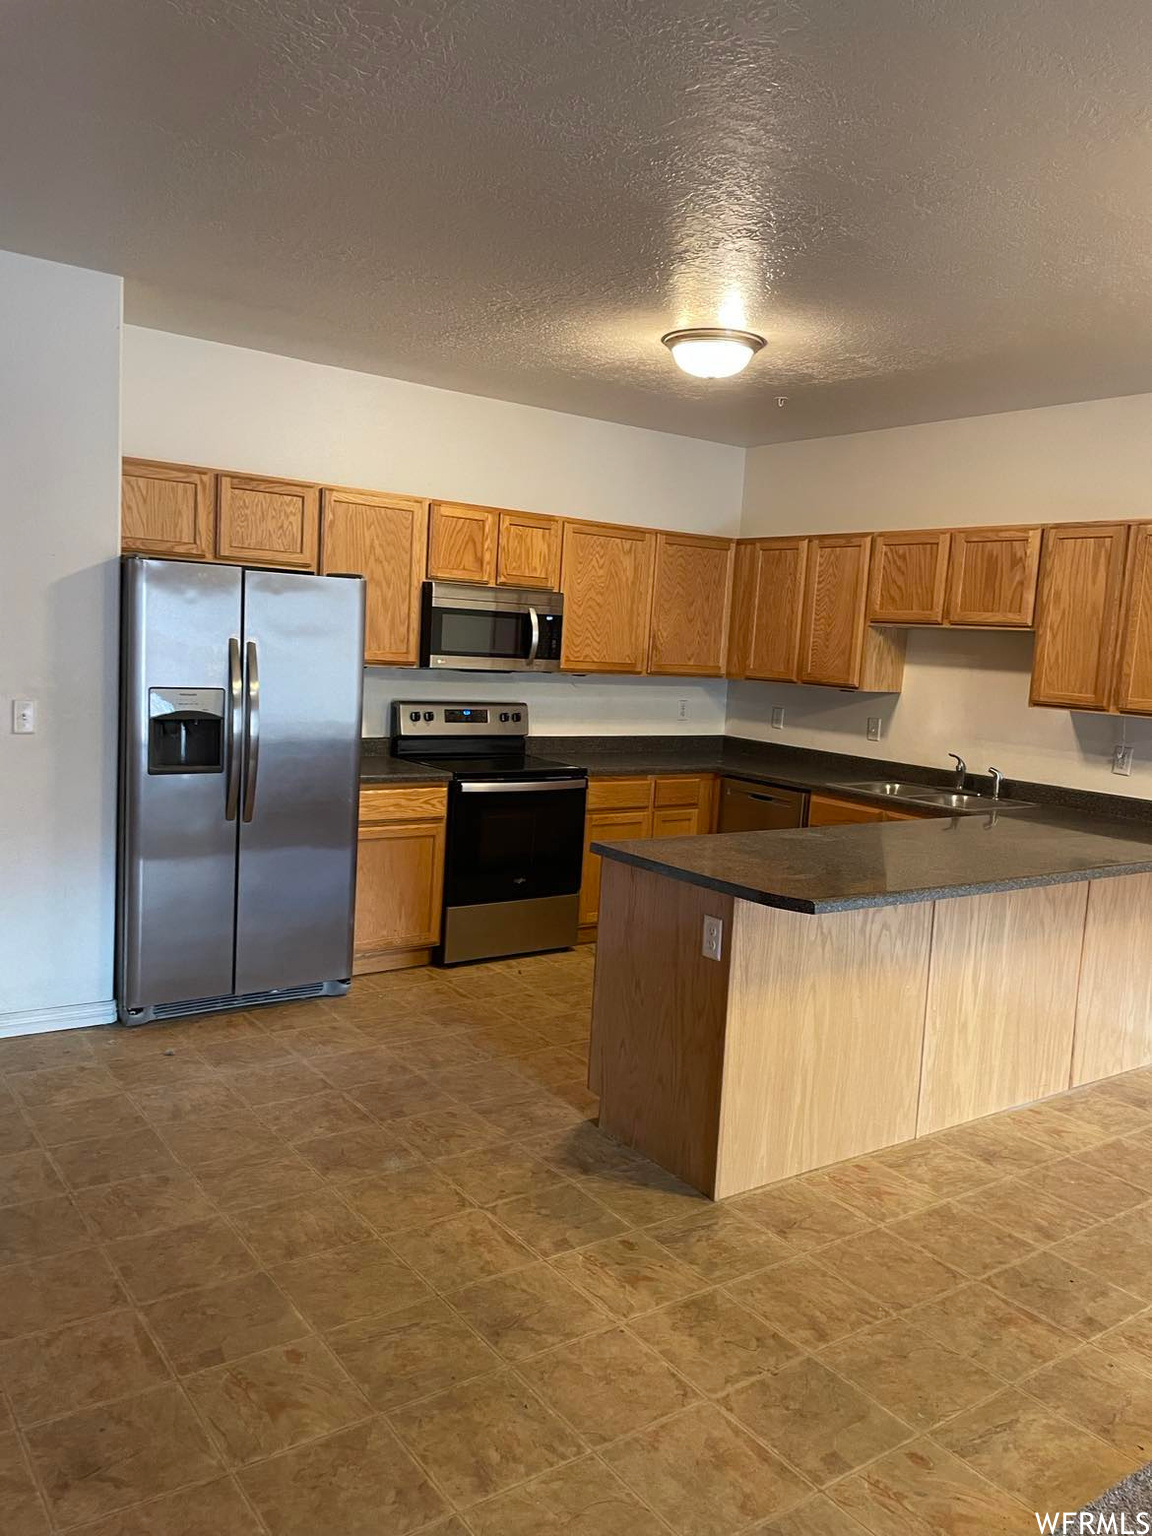 Kitchen featuring refrigerator, range oven, microwave, light tile flooring, brown cabinetry, and dark countertops